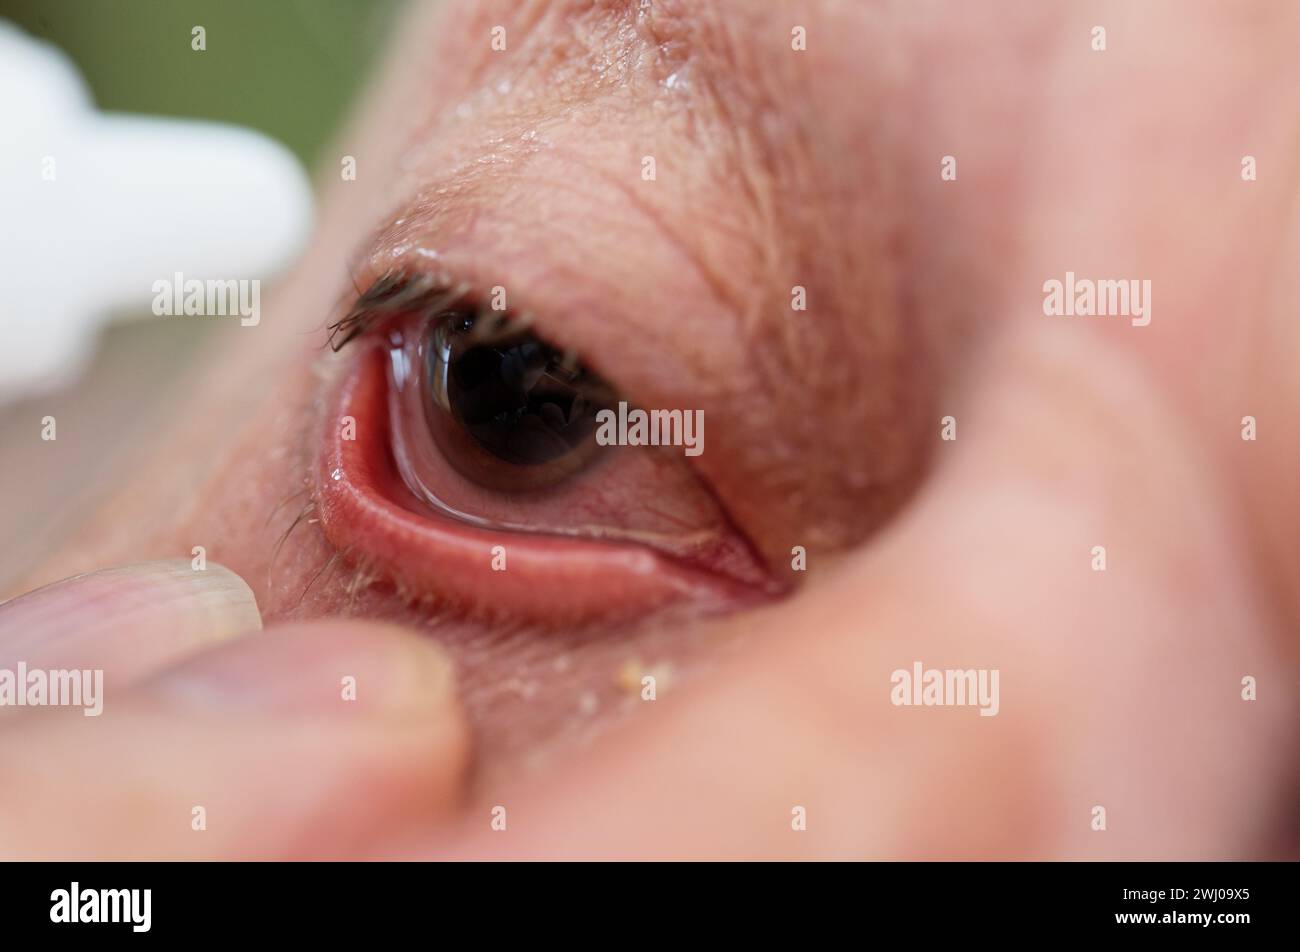 A man's pupil is still dilated after IOL surgery, an intraocular lens replacement. He is having his first eye drops. His eye is very red Stock Photo